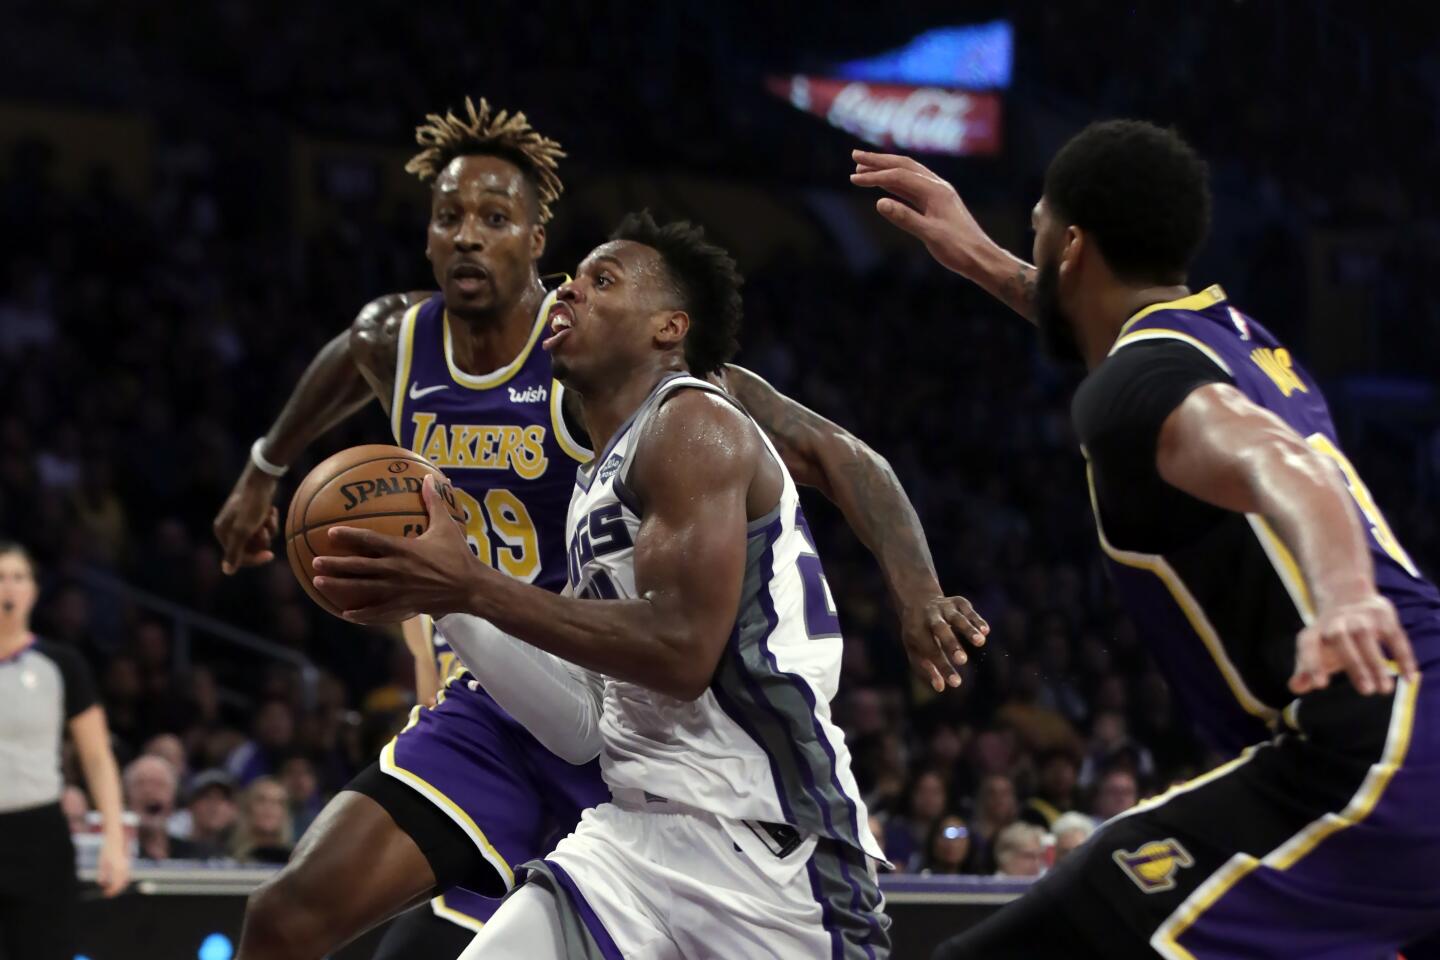 Sacramento Kings guard Buddy Hield, center, drives to the basket between Lakers center Dwight Howard, left, and forward Anthony Davis.